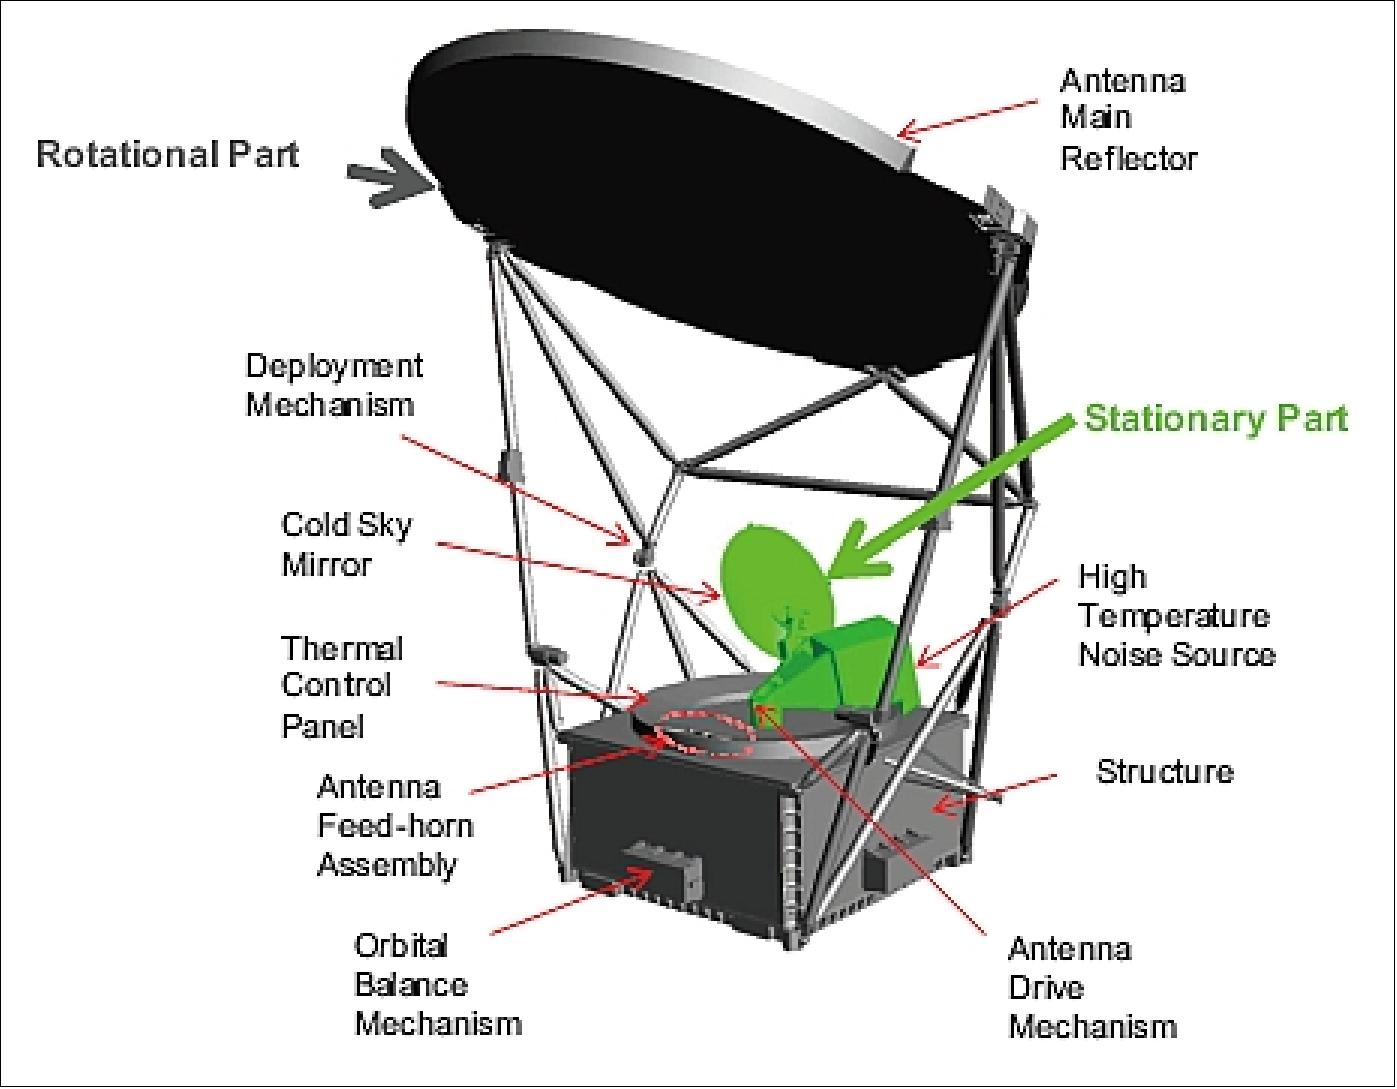 Figure 26: Overview and components of the AMSR2 instrument (image credit: JAXA)